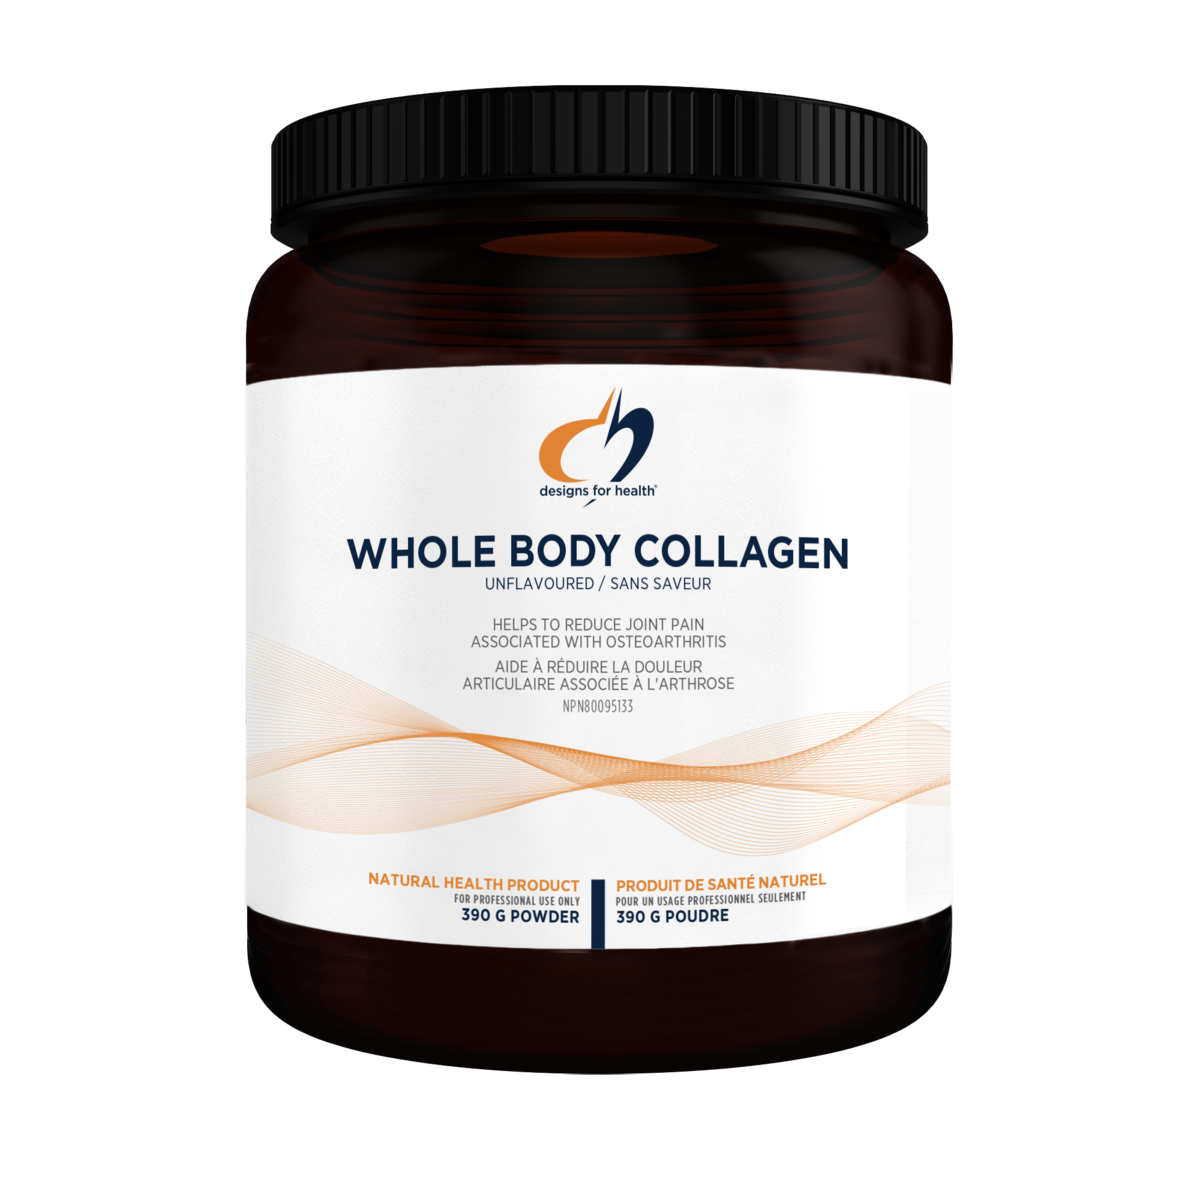 Whole Body Collagen Designs for Health